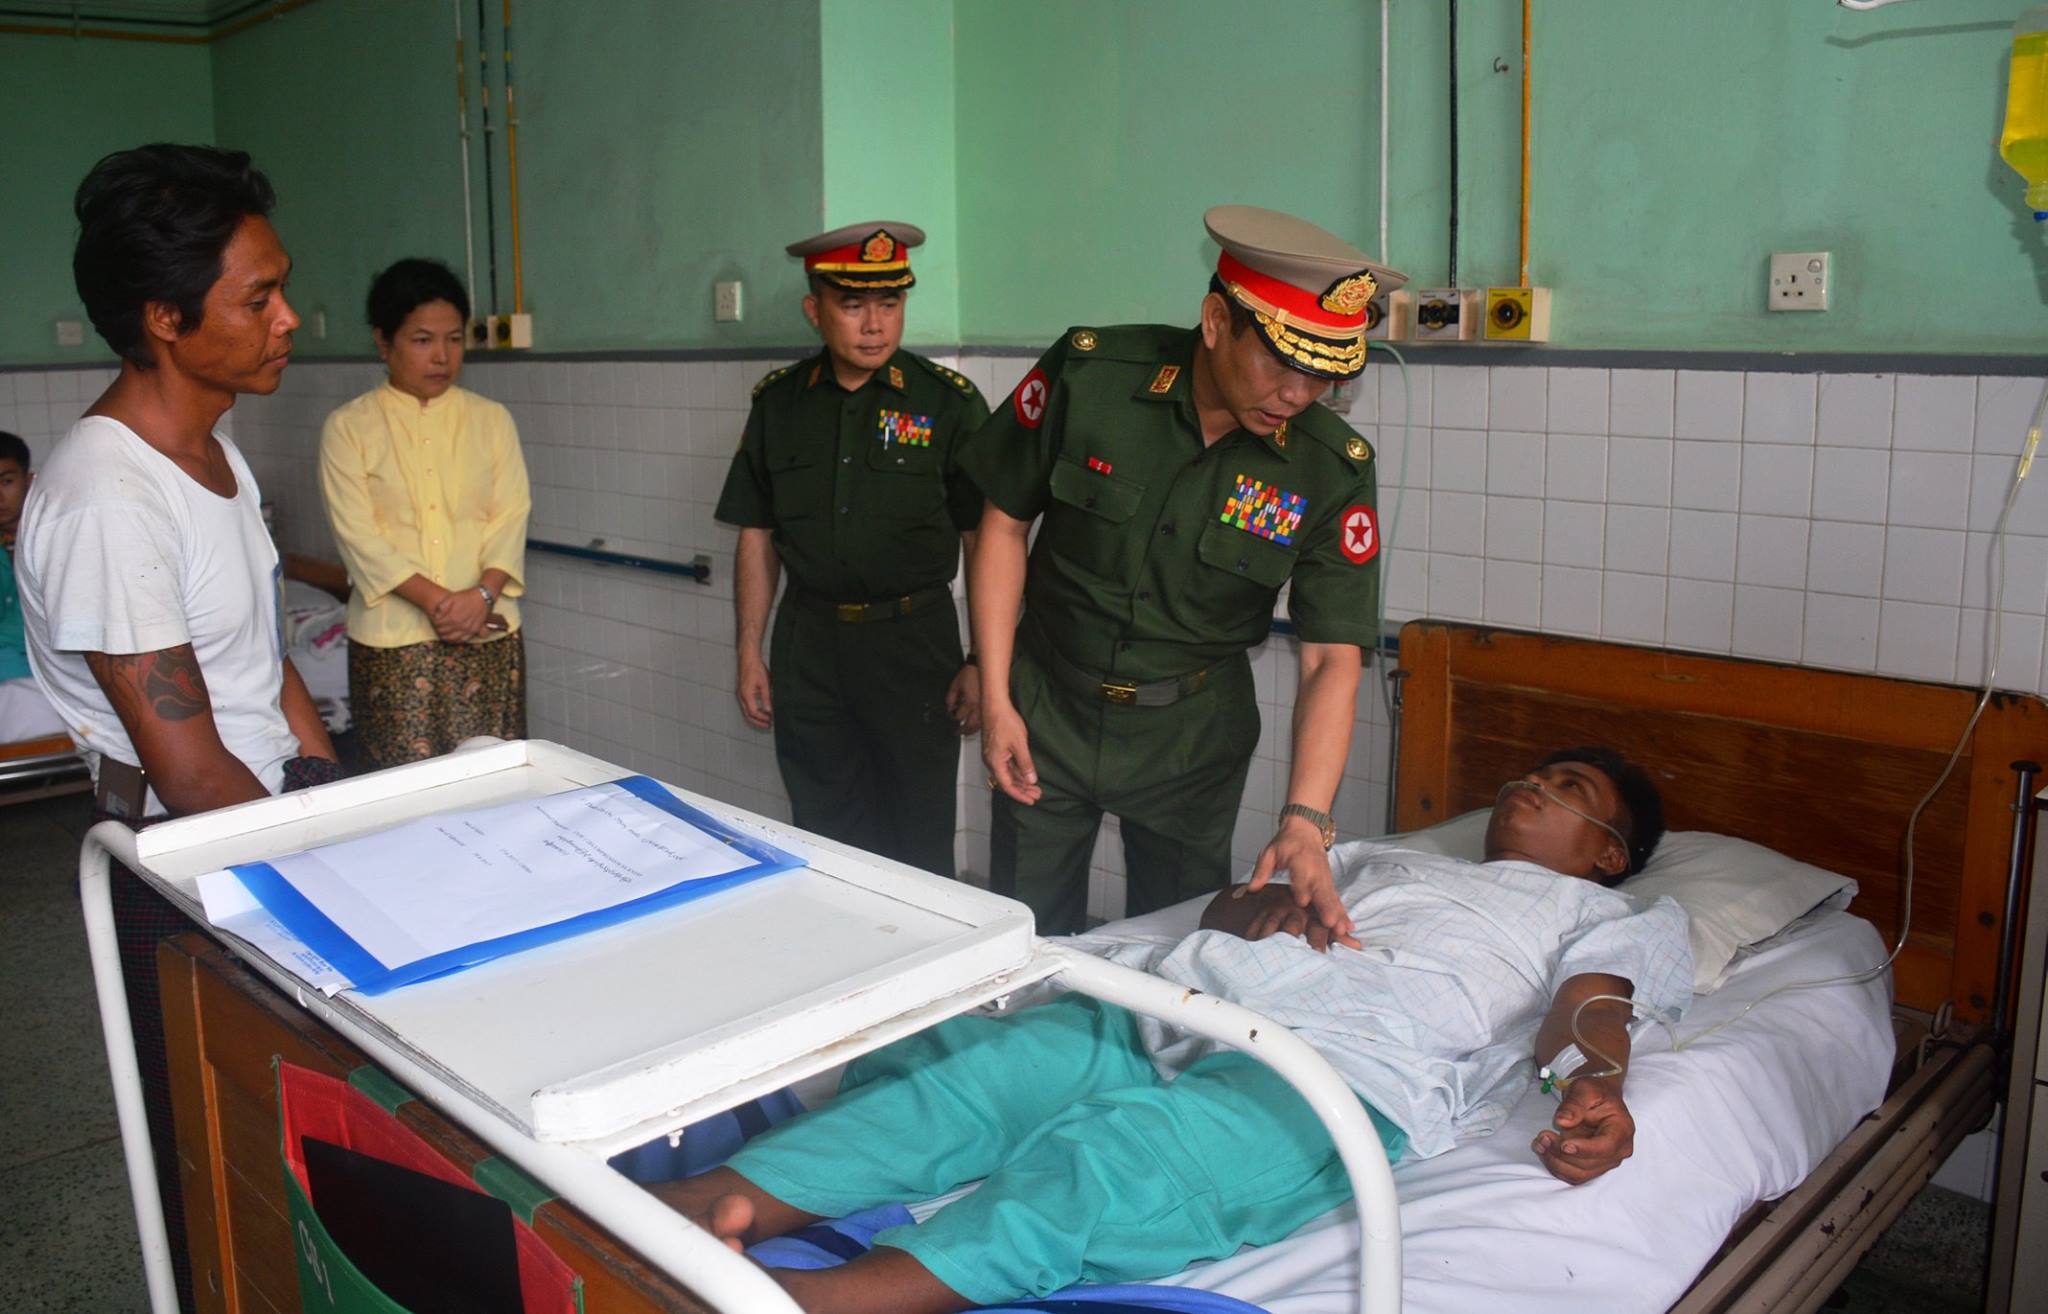 Yangon Commander Brigadier General Thet Pone visits one of the injured divers at the hospital. Photo: Facebook / Office of the Commander-in-Chief of Defense Services